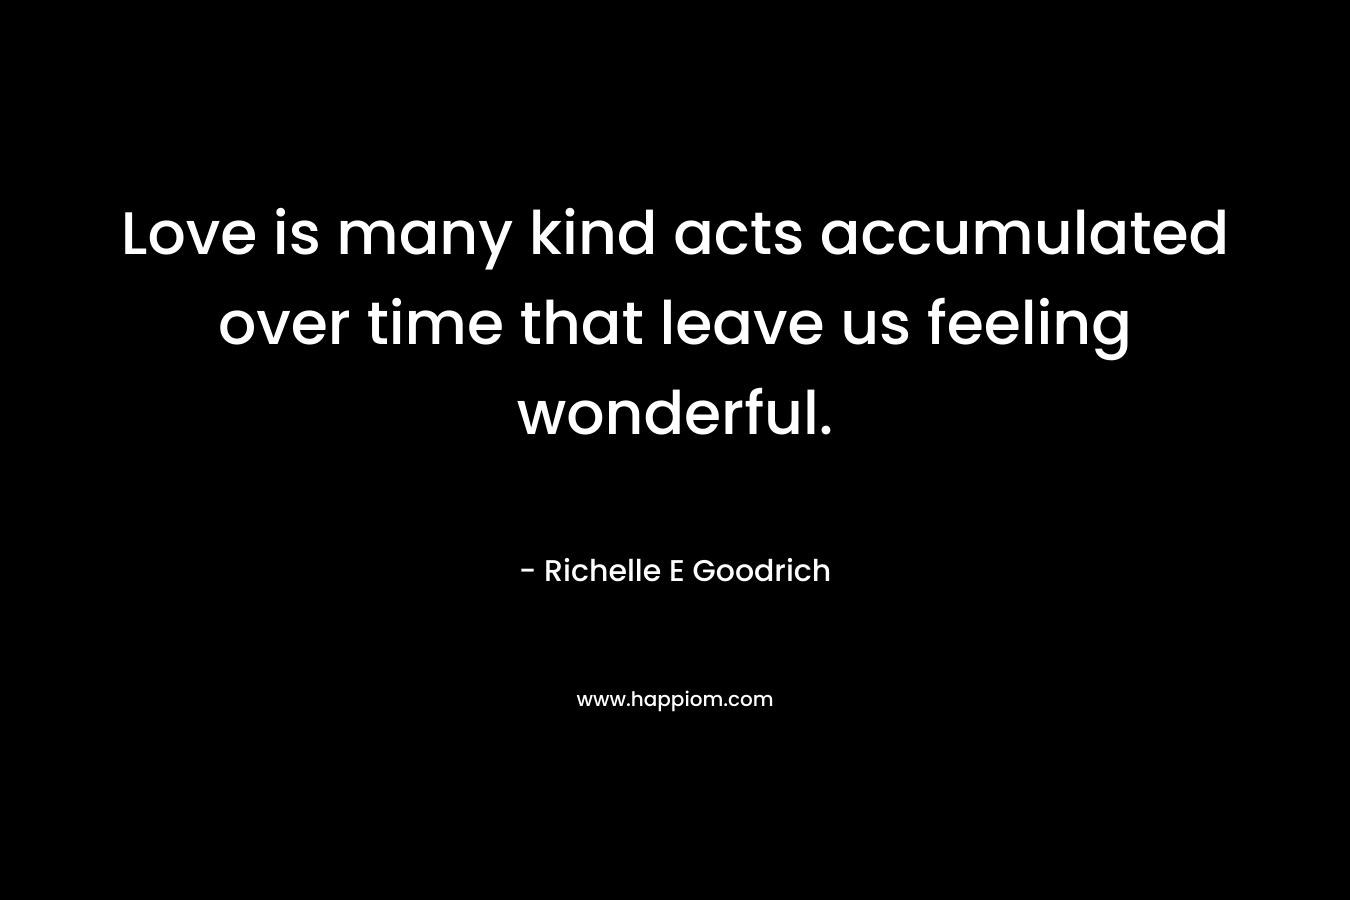 Love is many kind acts accumulated over time that leave us feeling wonderful. – Richelle E Goodrich